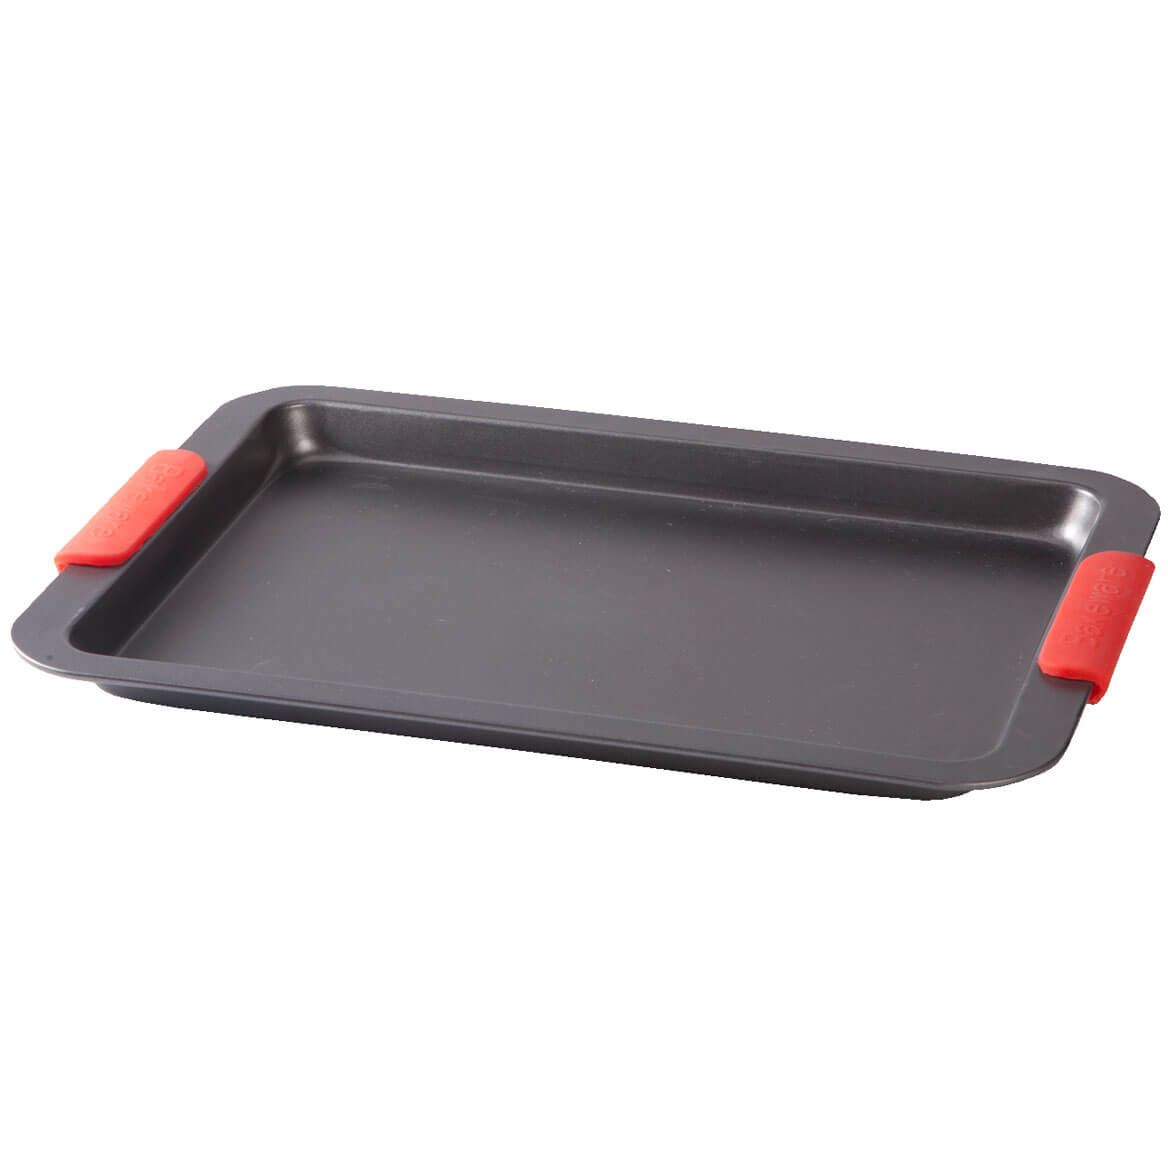 Baking Sheet with Red Silicone Handles by Home-Style Kitchen + '-' + 356752